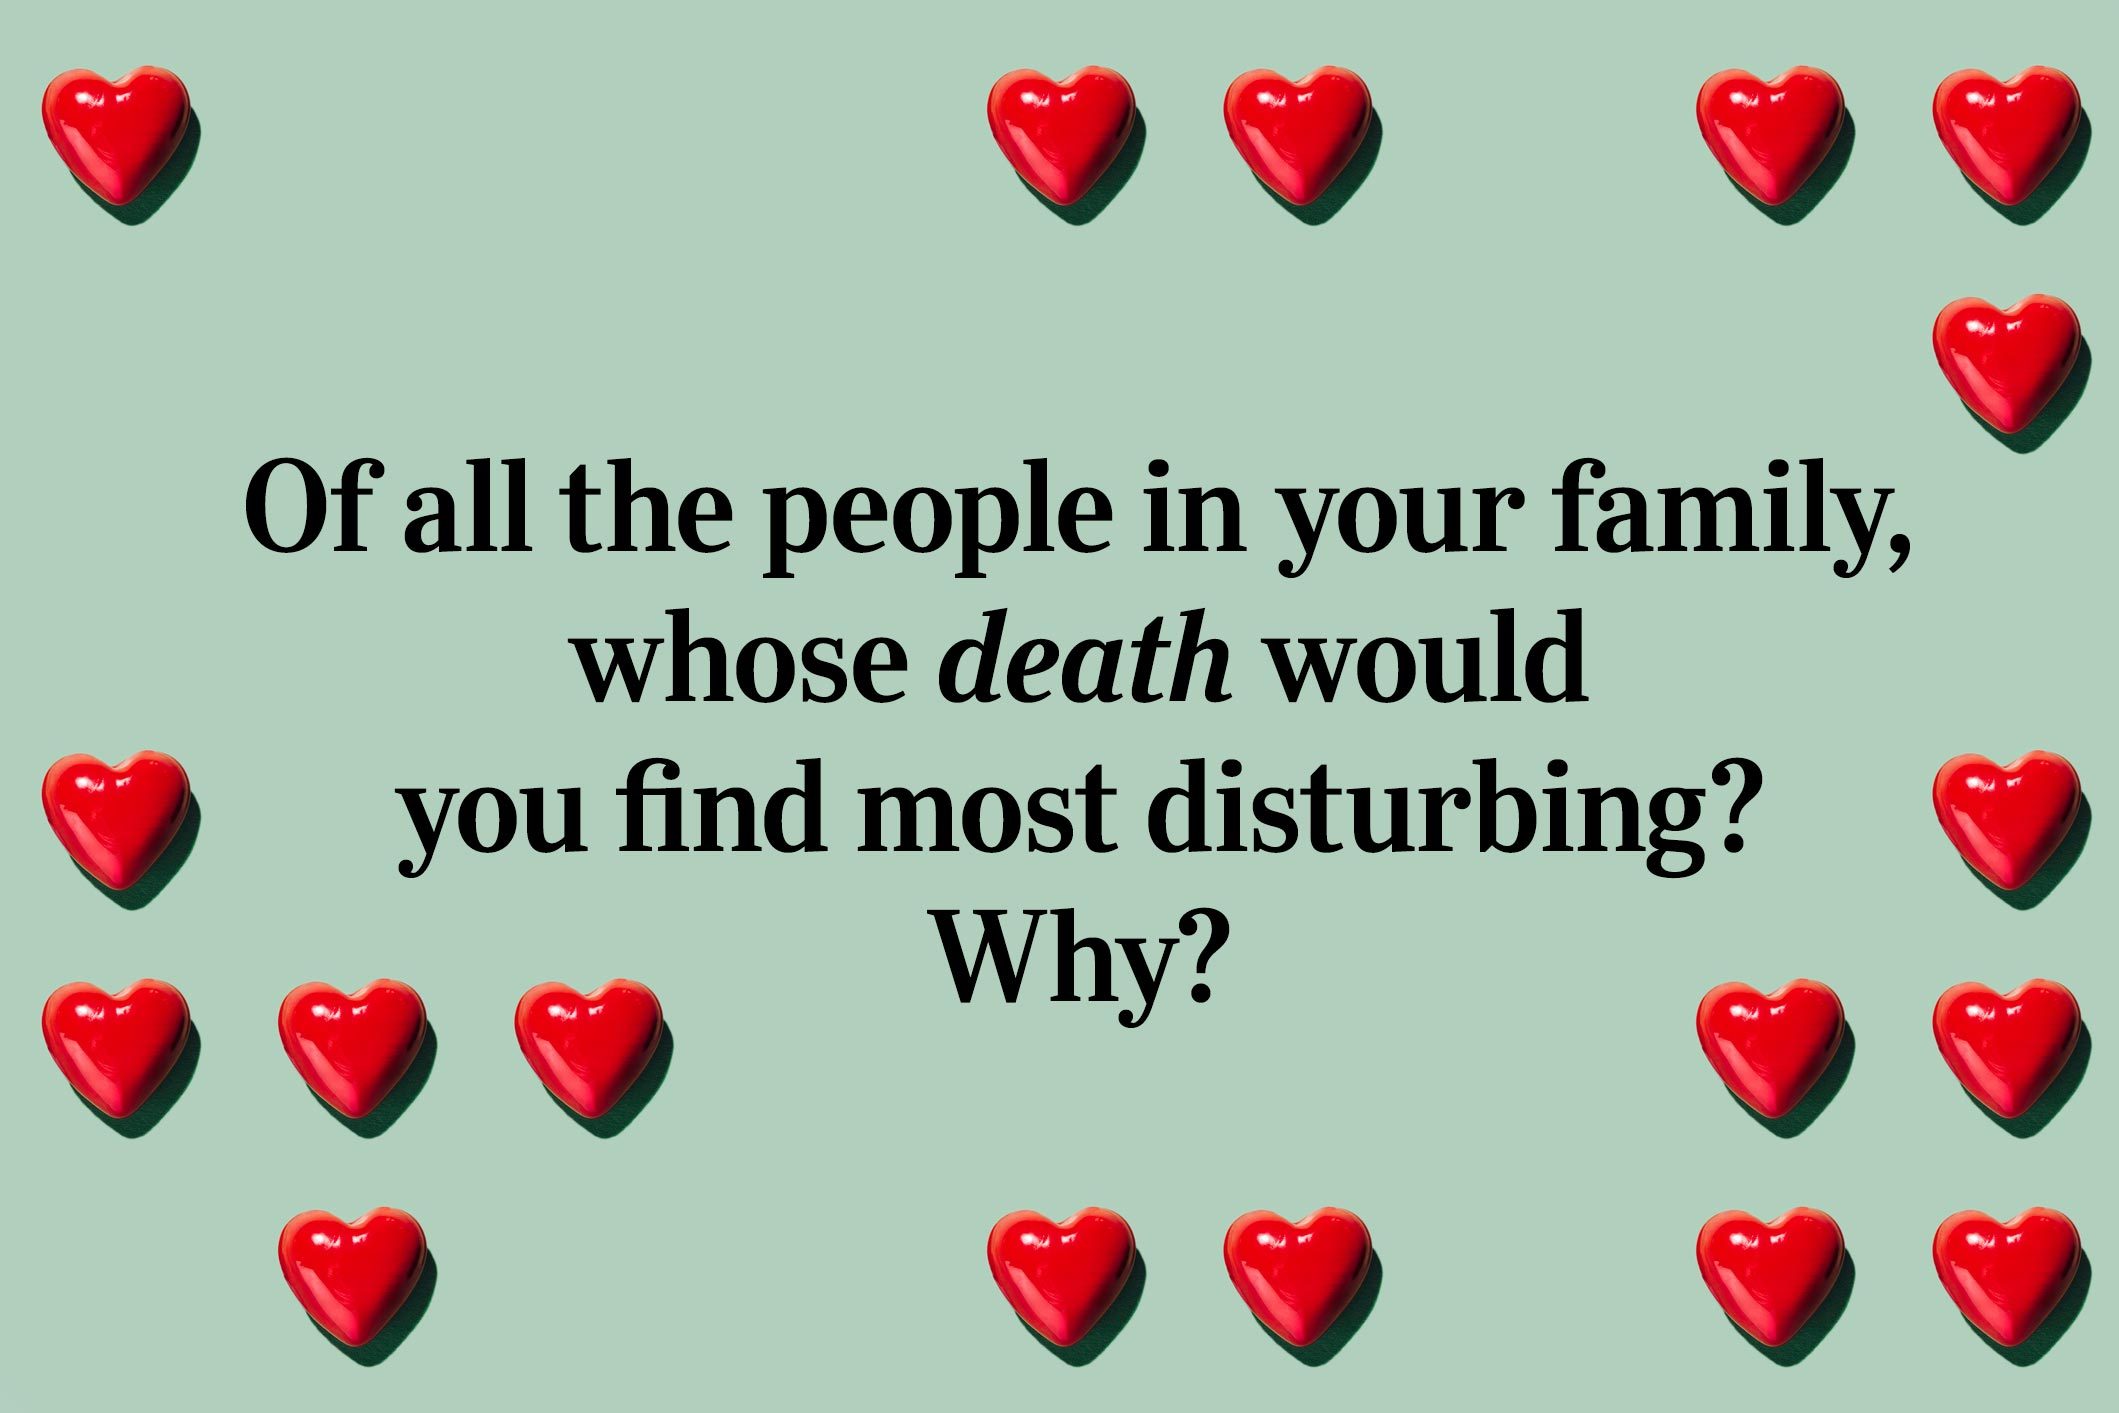 <p>Of all the people in your family, whose death would you find most disturbing? Why?</p>